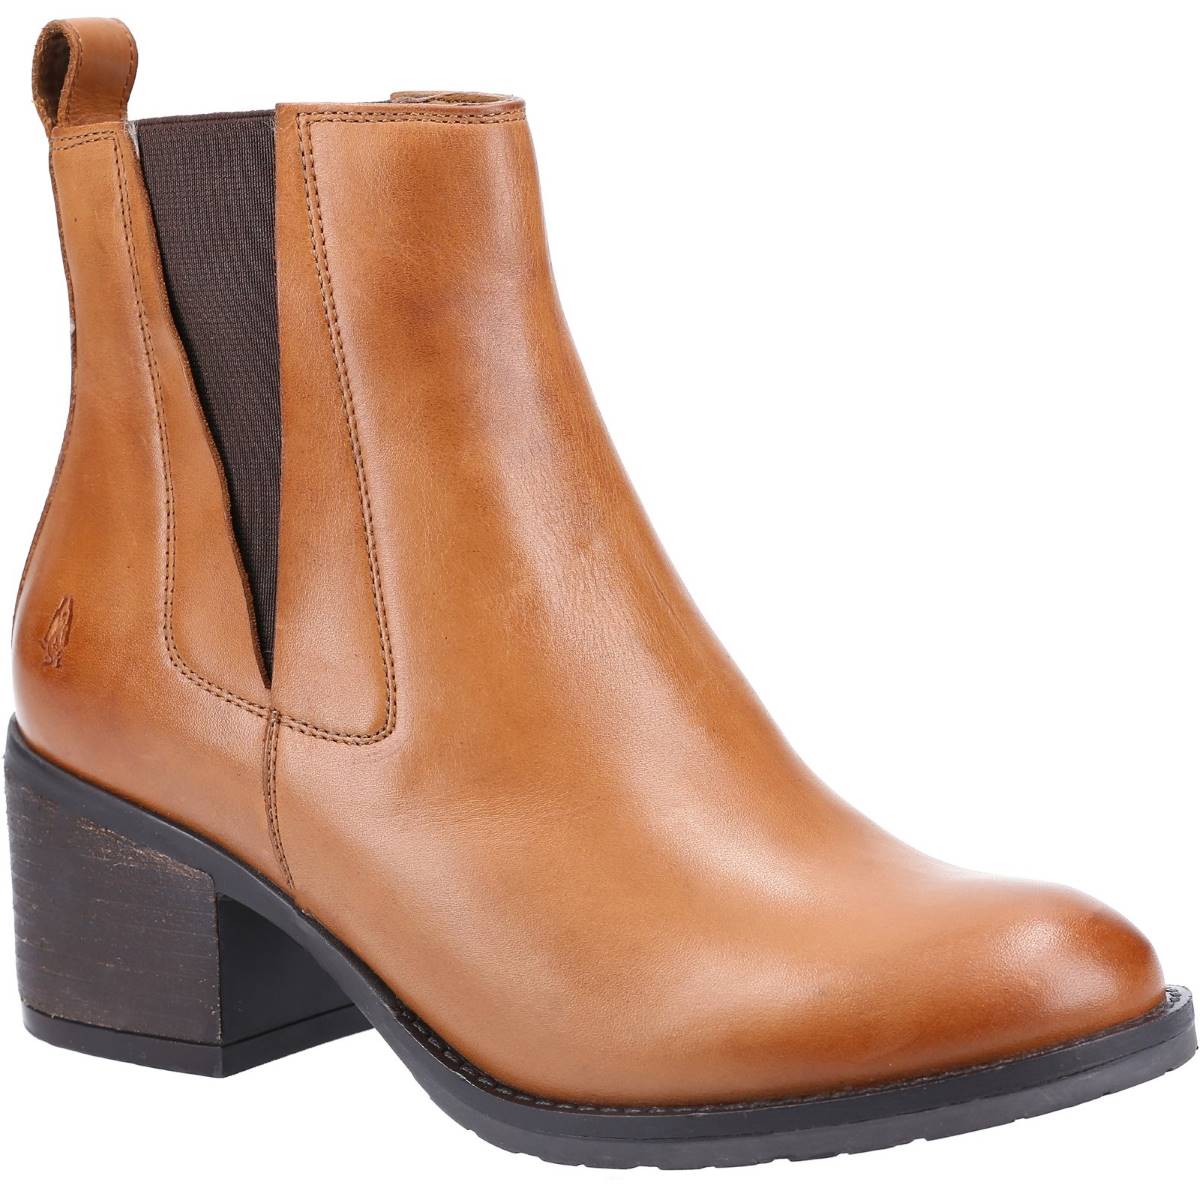 Hush Puppies Hermione Tan Womens ankle boots HPW1000-239-2 in a Plain Leather in Size 6